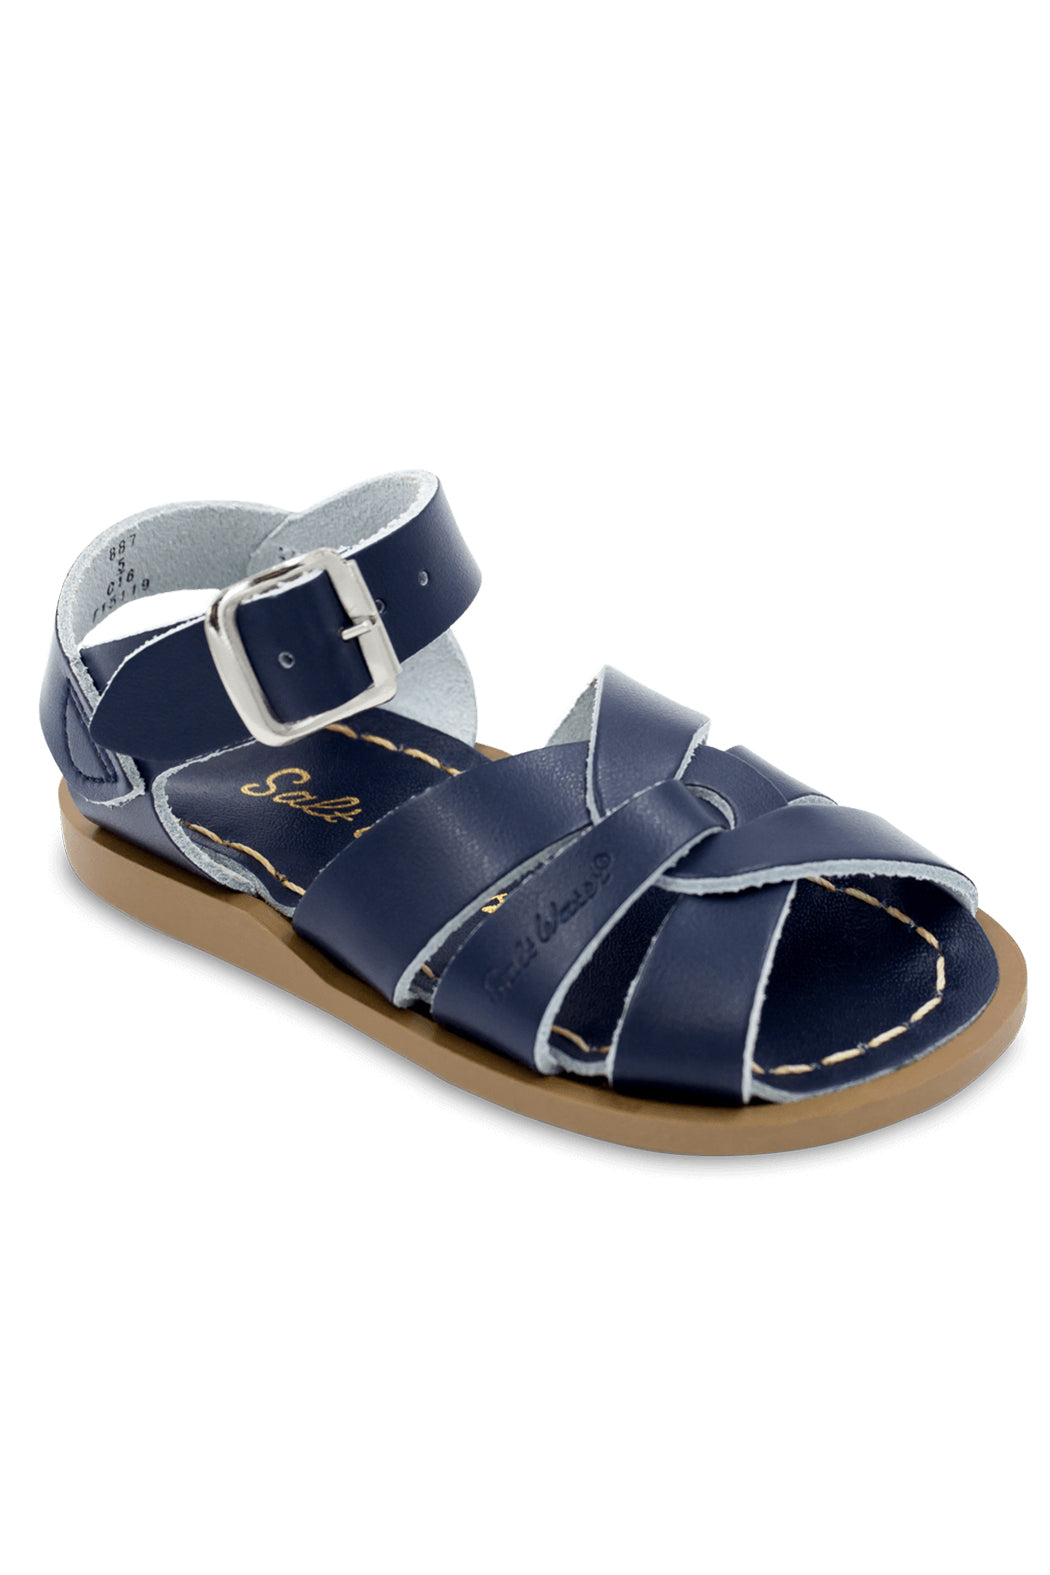 Hoy Shoes The Original Salt Water Sandals - Youth/Adult Navy